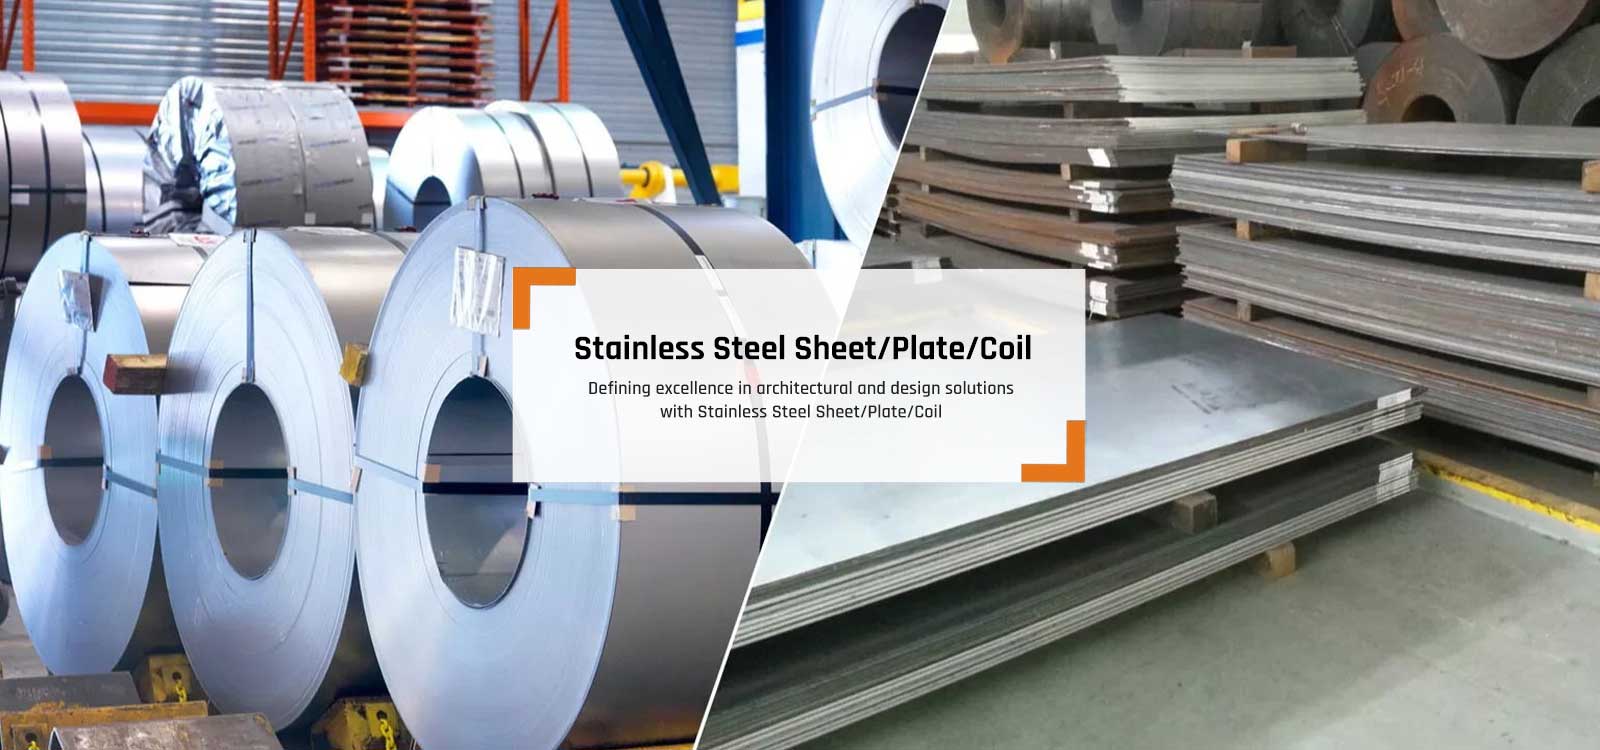 Stainless Steel Sheet Plates Coils Manufacturers in Imphal